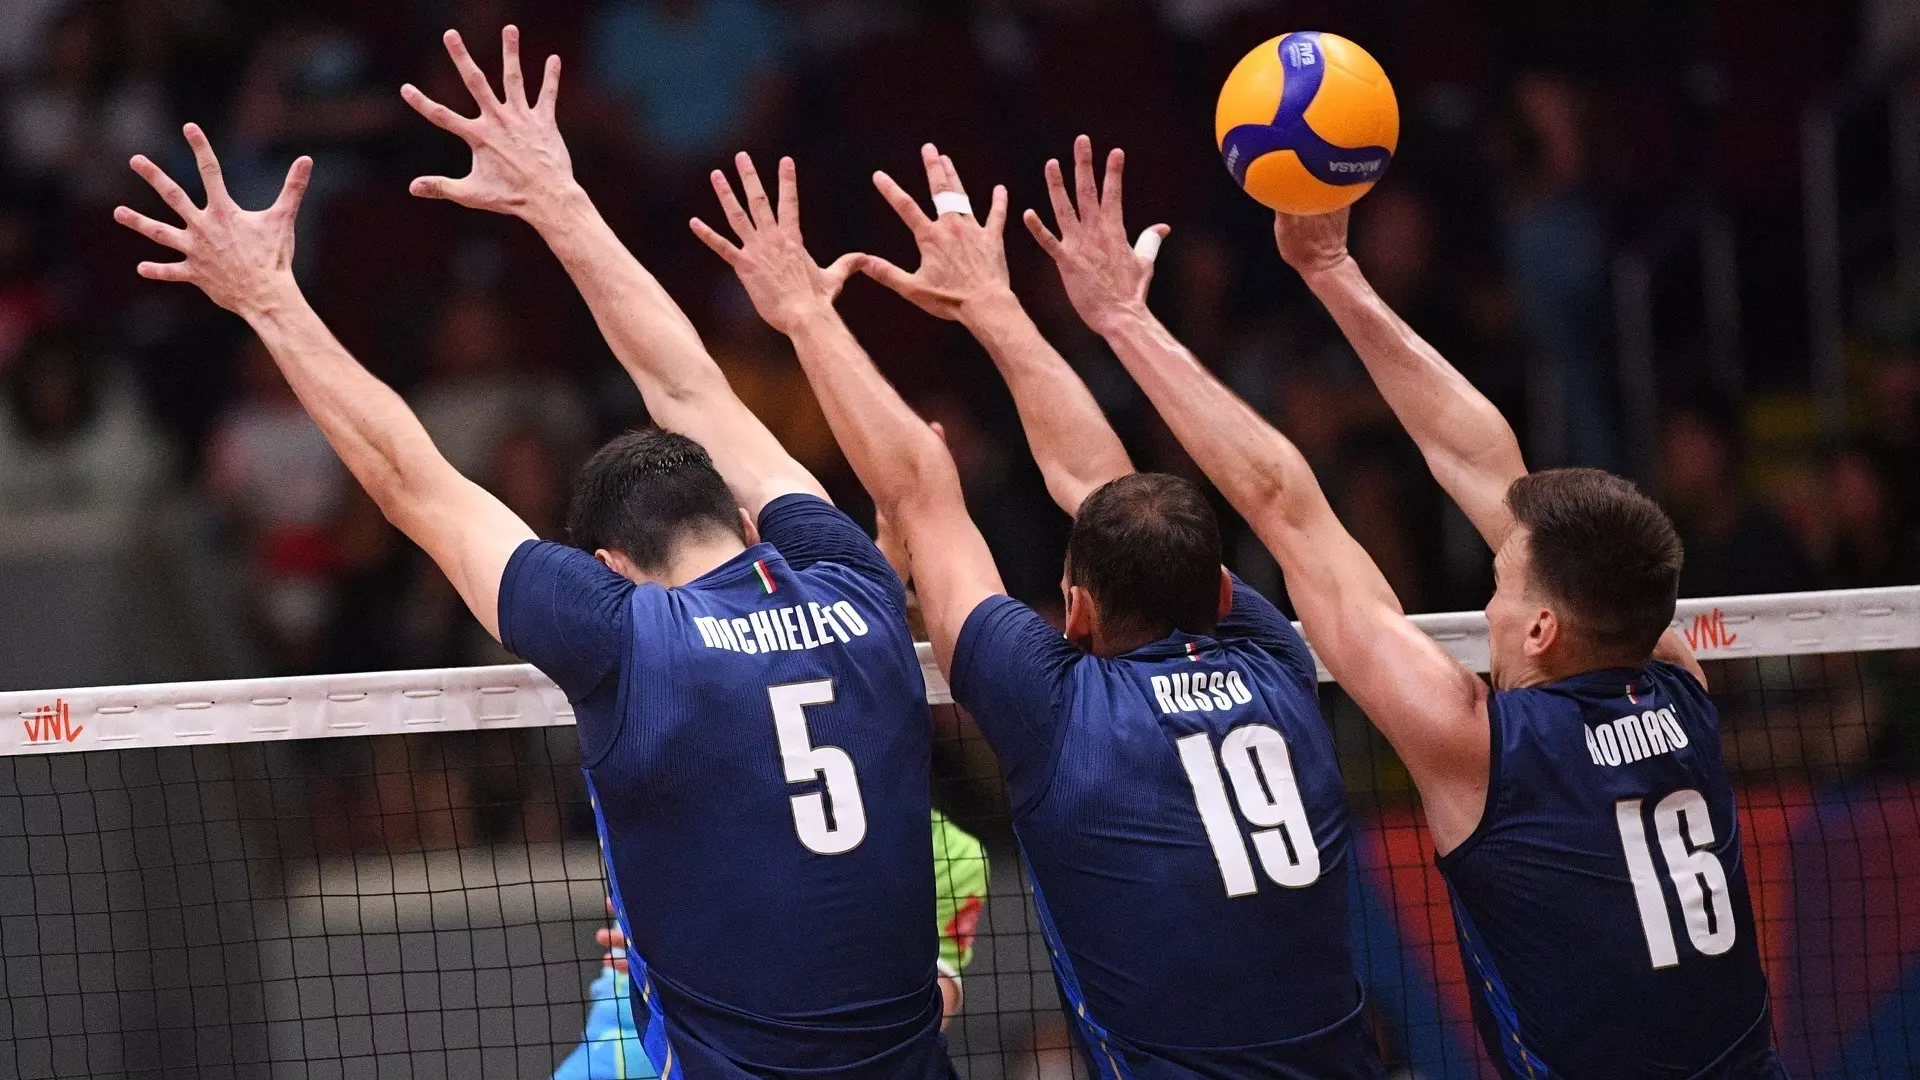 Eurovolley 2023, Roma verso il sold out